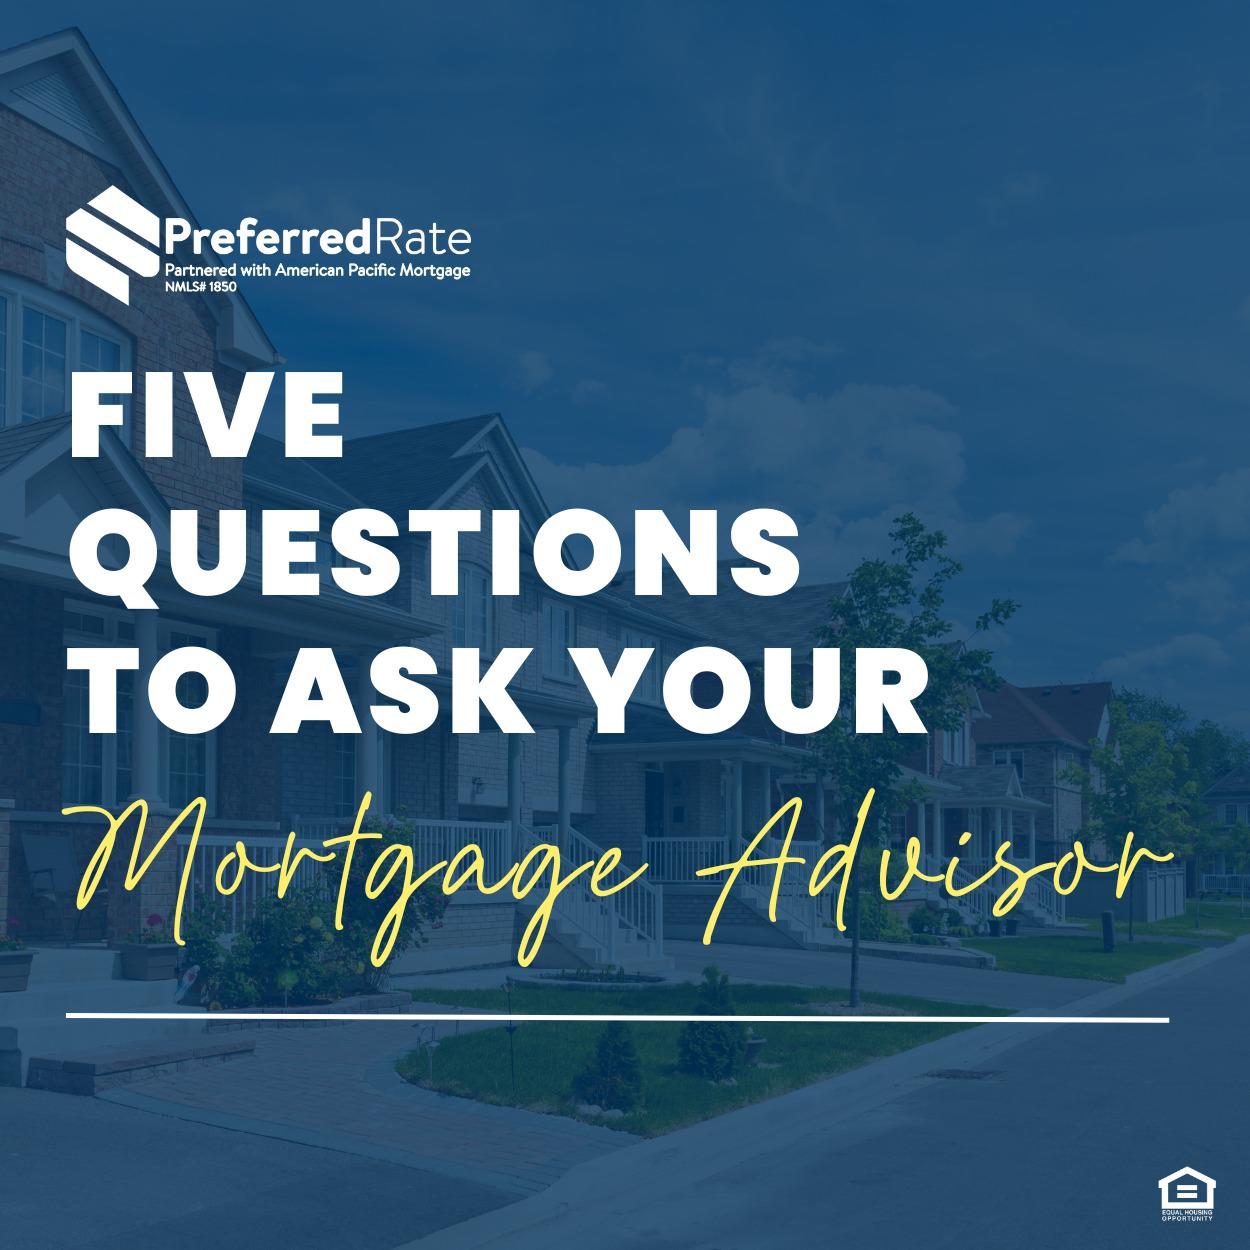 Having a list of mortgage questions to ask your mortgage advisor is just the start. Knowing the answ Sergio Giangrande - Preferred Rate Oakbrook Terrace (847)489-7742